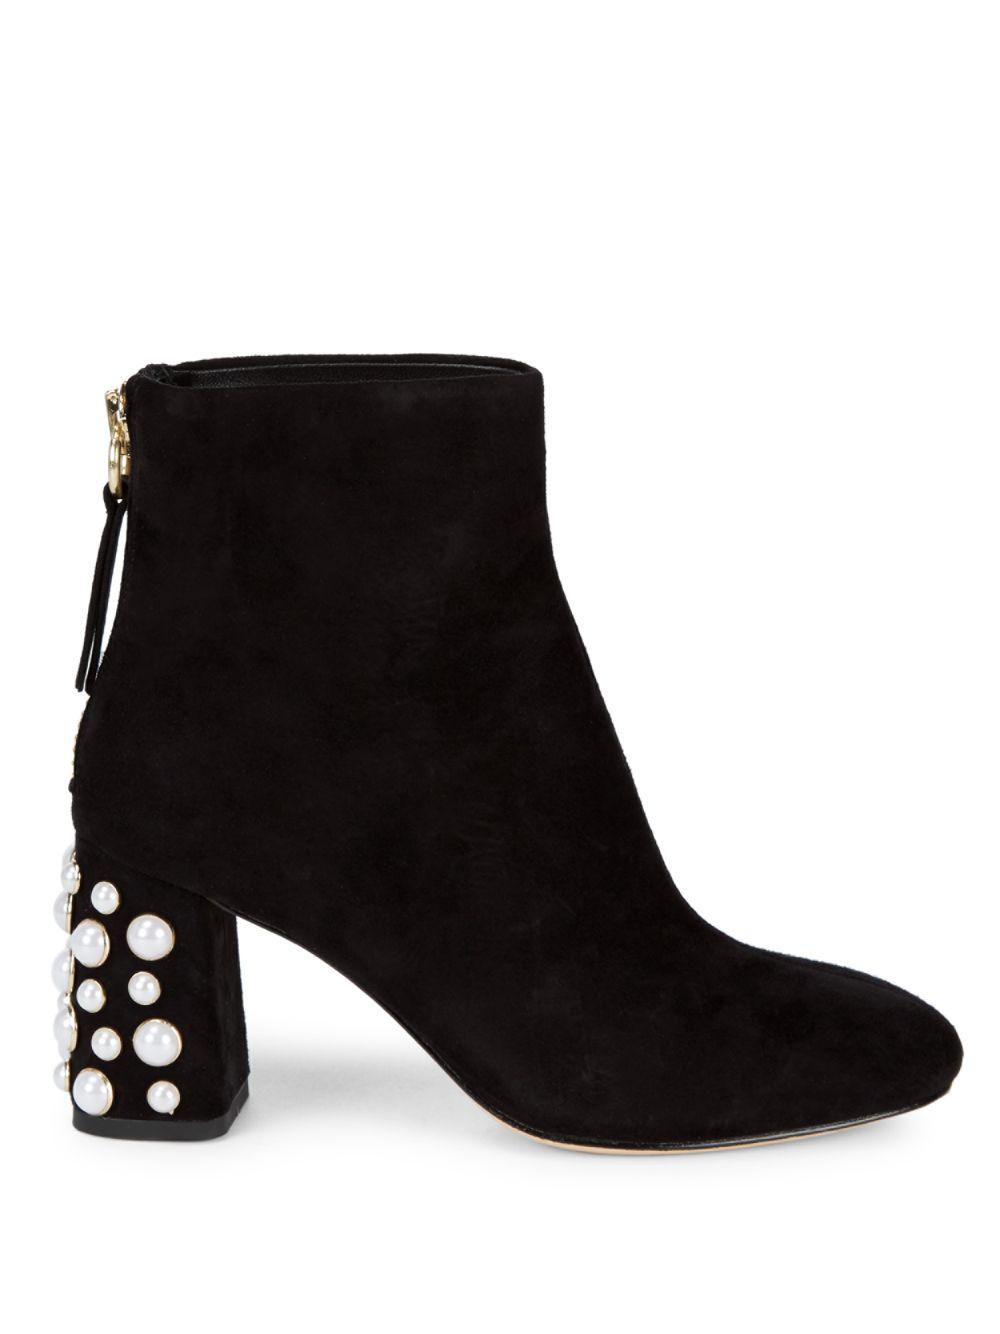 Alice + Olivia Leather Mulberry Pearl Heel Booties in Black - Lyst